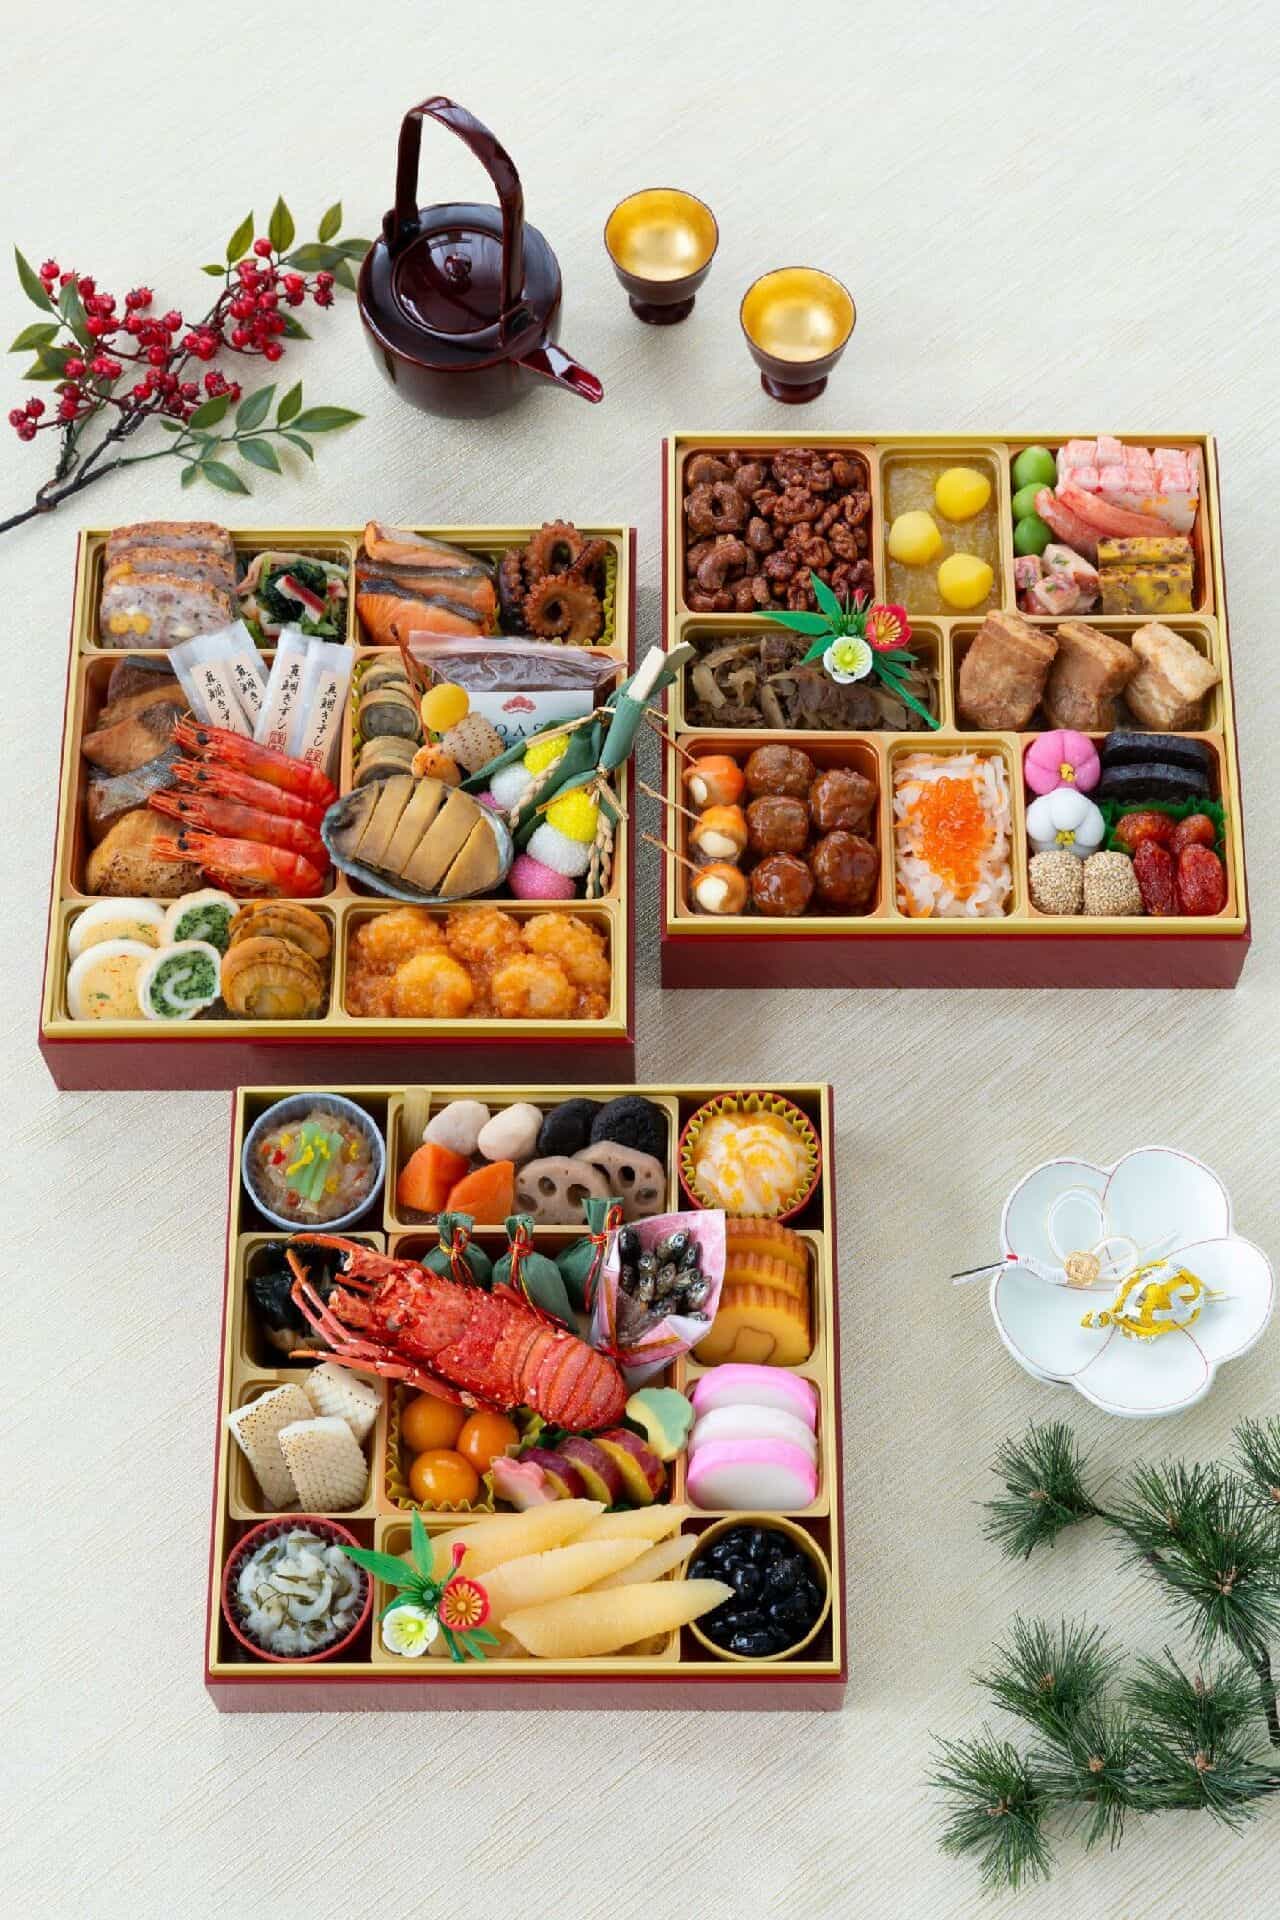 Takarajima Channel accepting reservations for "Selected Osechi" from popular women's magazines